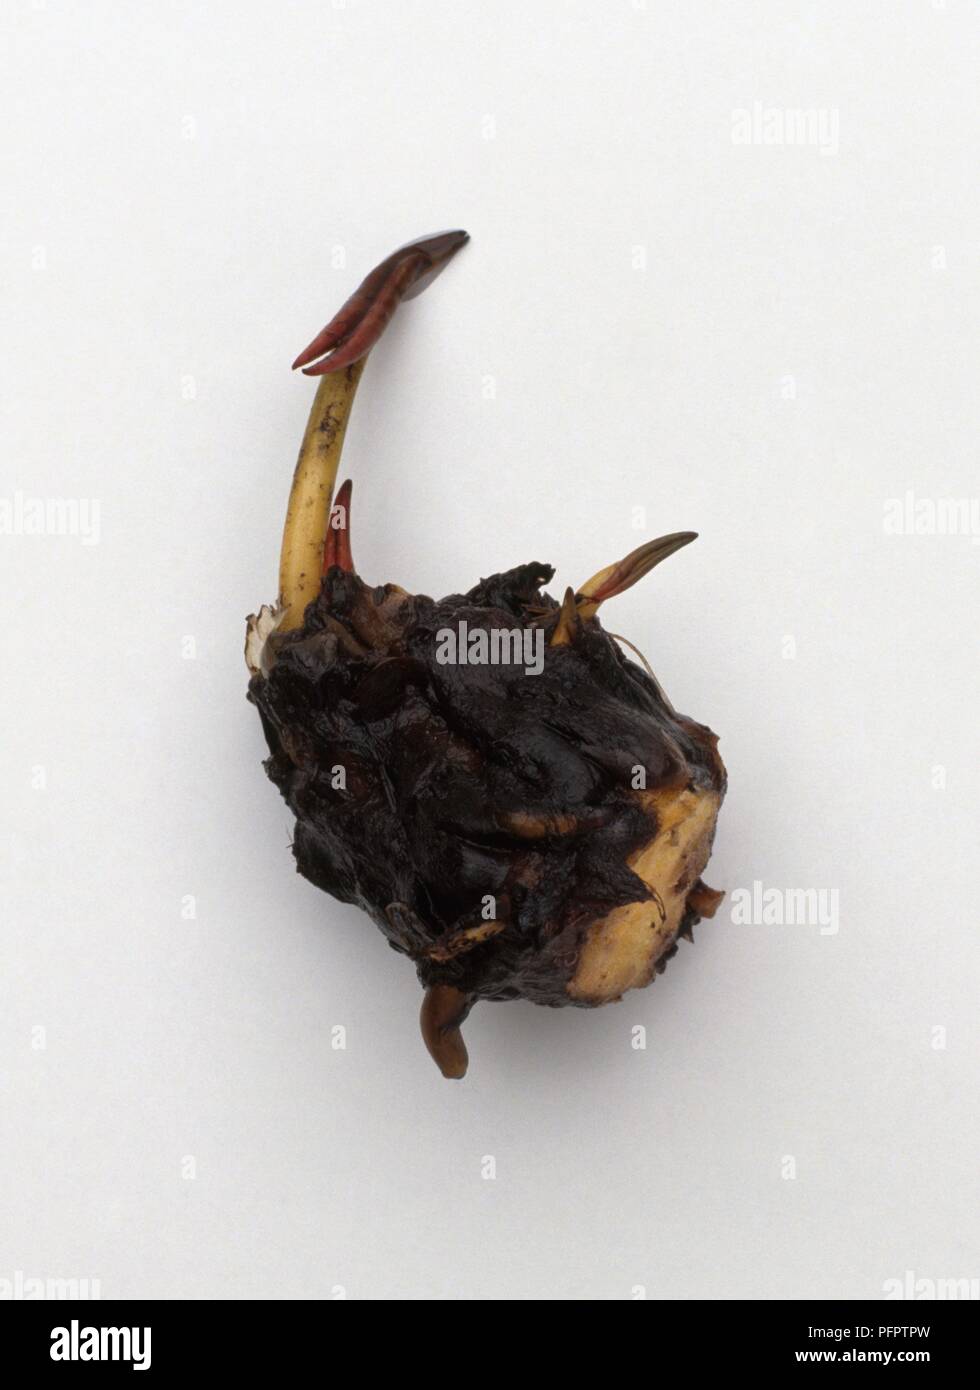 Water lily bud attached to root Stock Photo